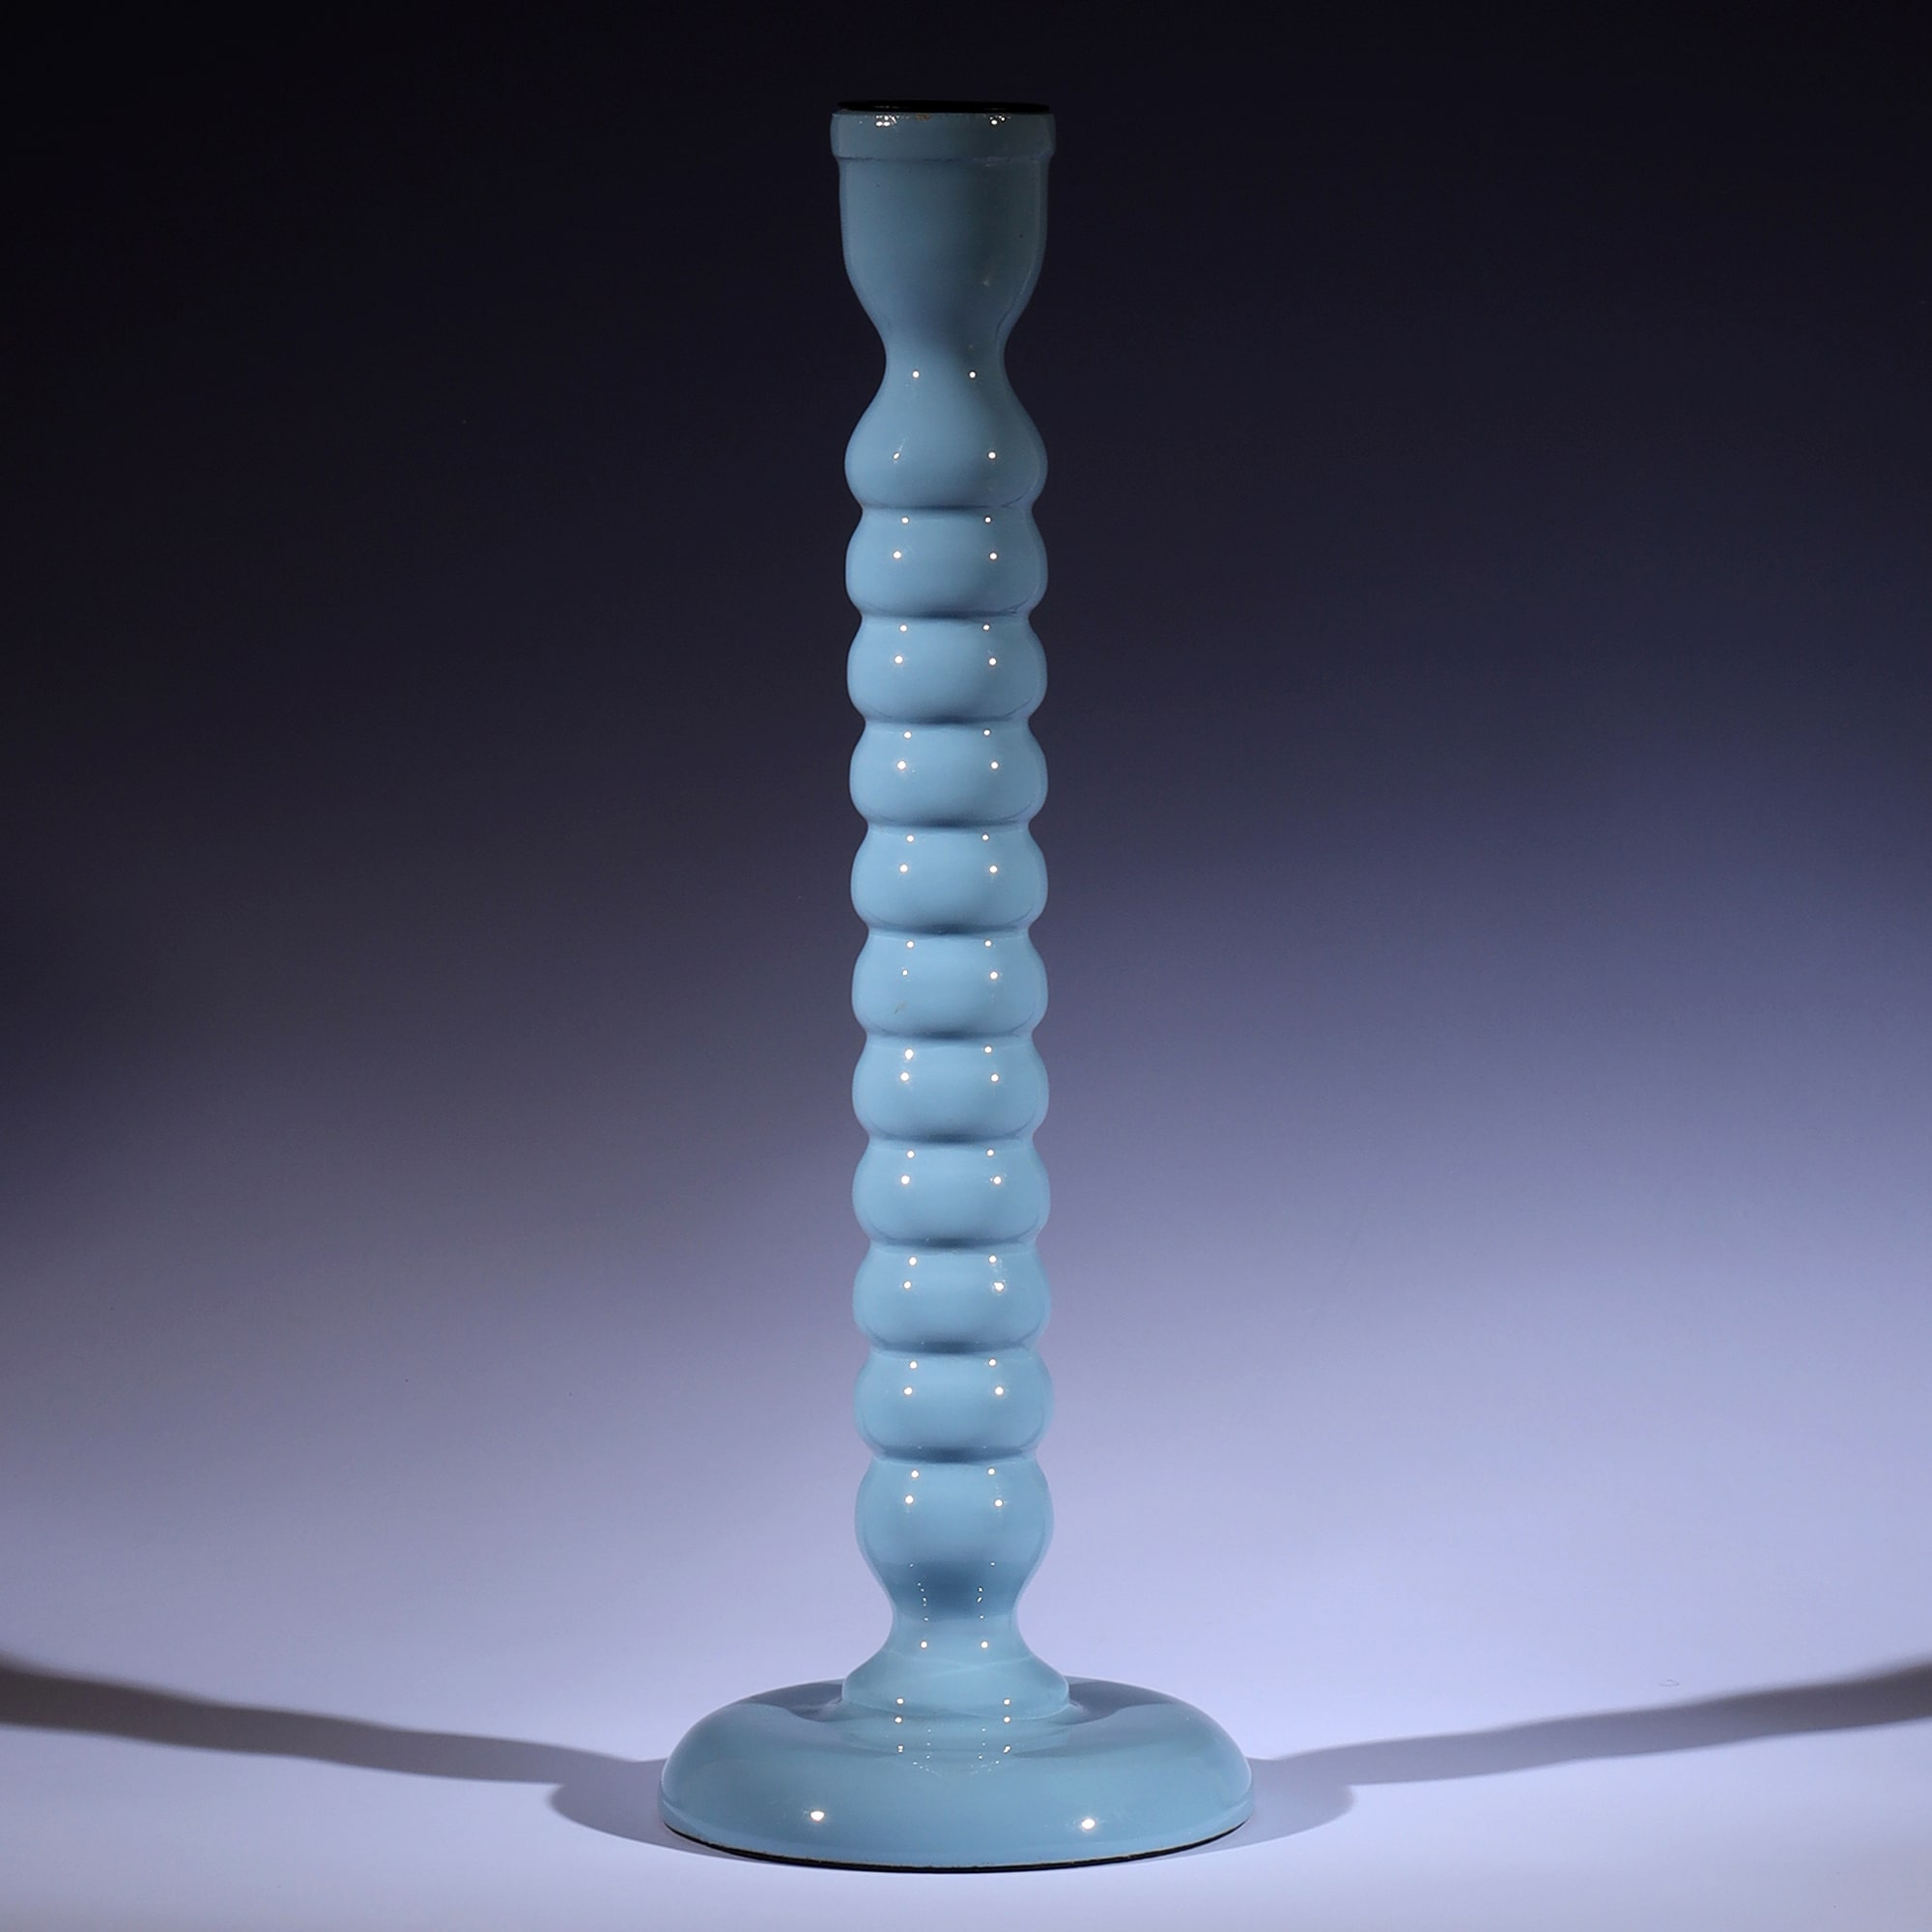 Powder Blue Polished Lacquer Candle holder,it is twisted all the way down like a corkscrew tapered at the bottom